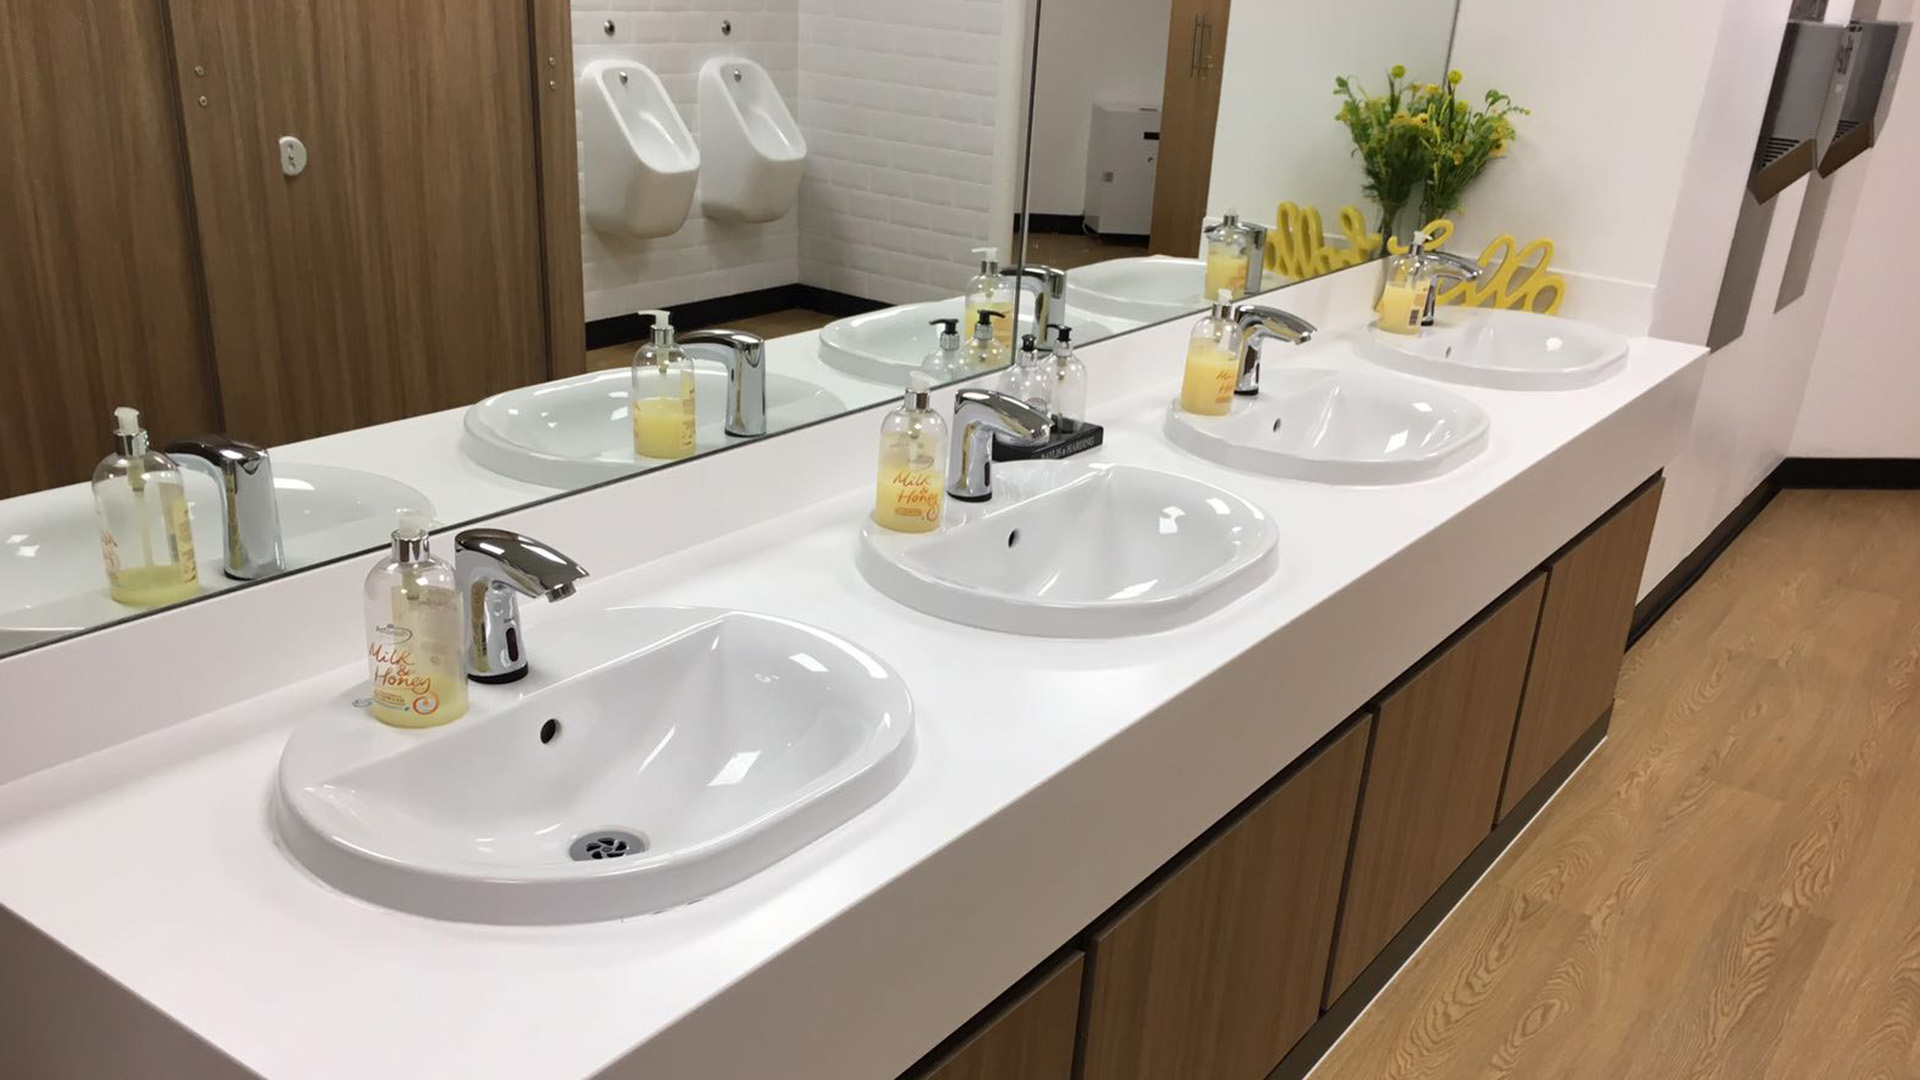 Stevens Washrooms - Commercial Washroom Installations - Sanitary Ware and Plumbing Sensor Operated Systems